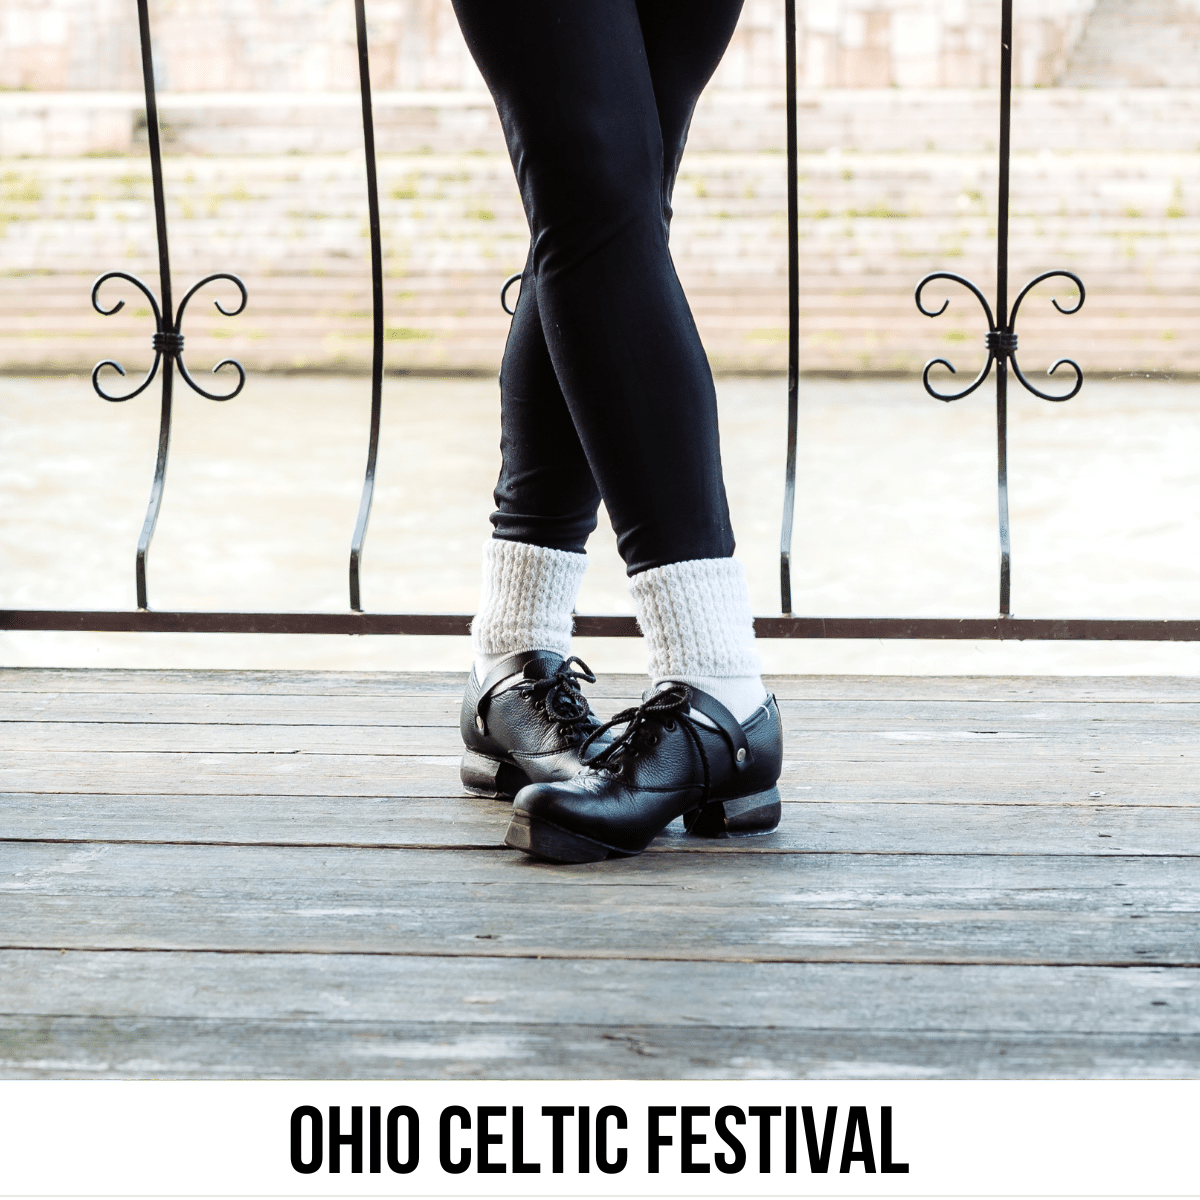 A square image of a close-up photo of legs, dancing. The person is wearing black leggings, white socks, and black dancing shoes. There is a wrought iron fence in the background. A white strip across the bottom has text Ohio Celtic Festival.